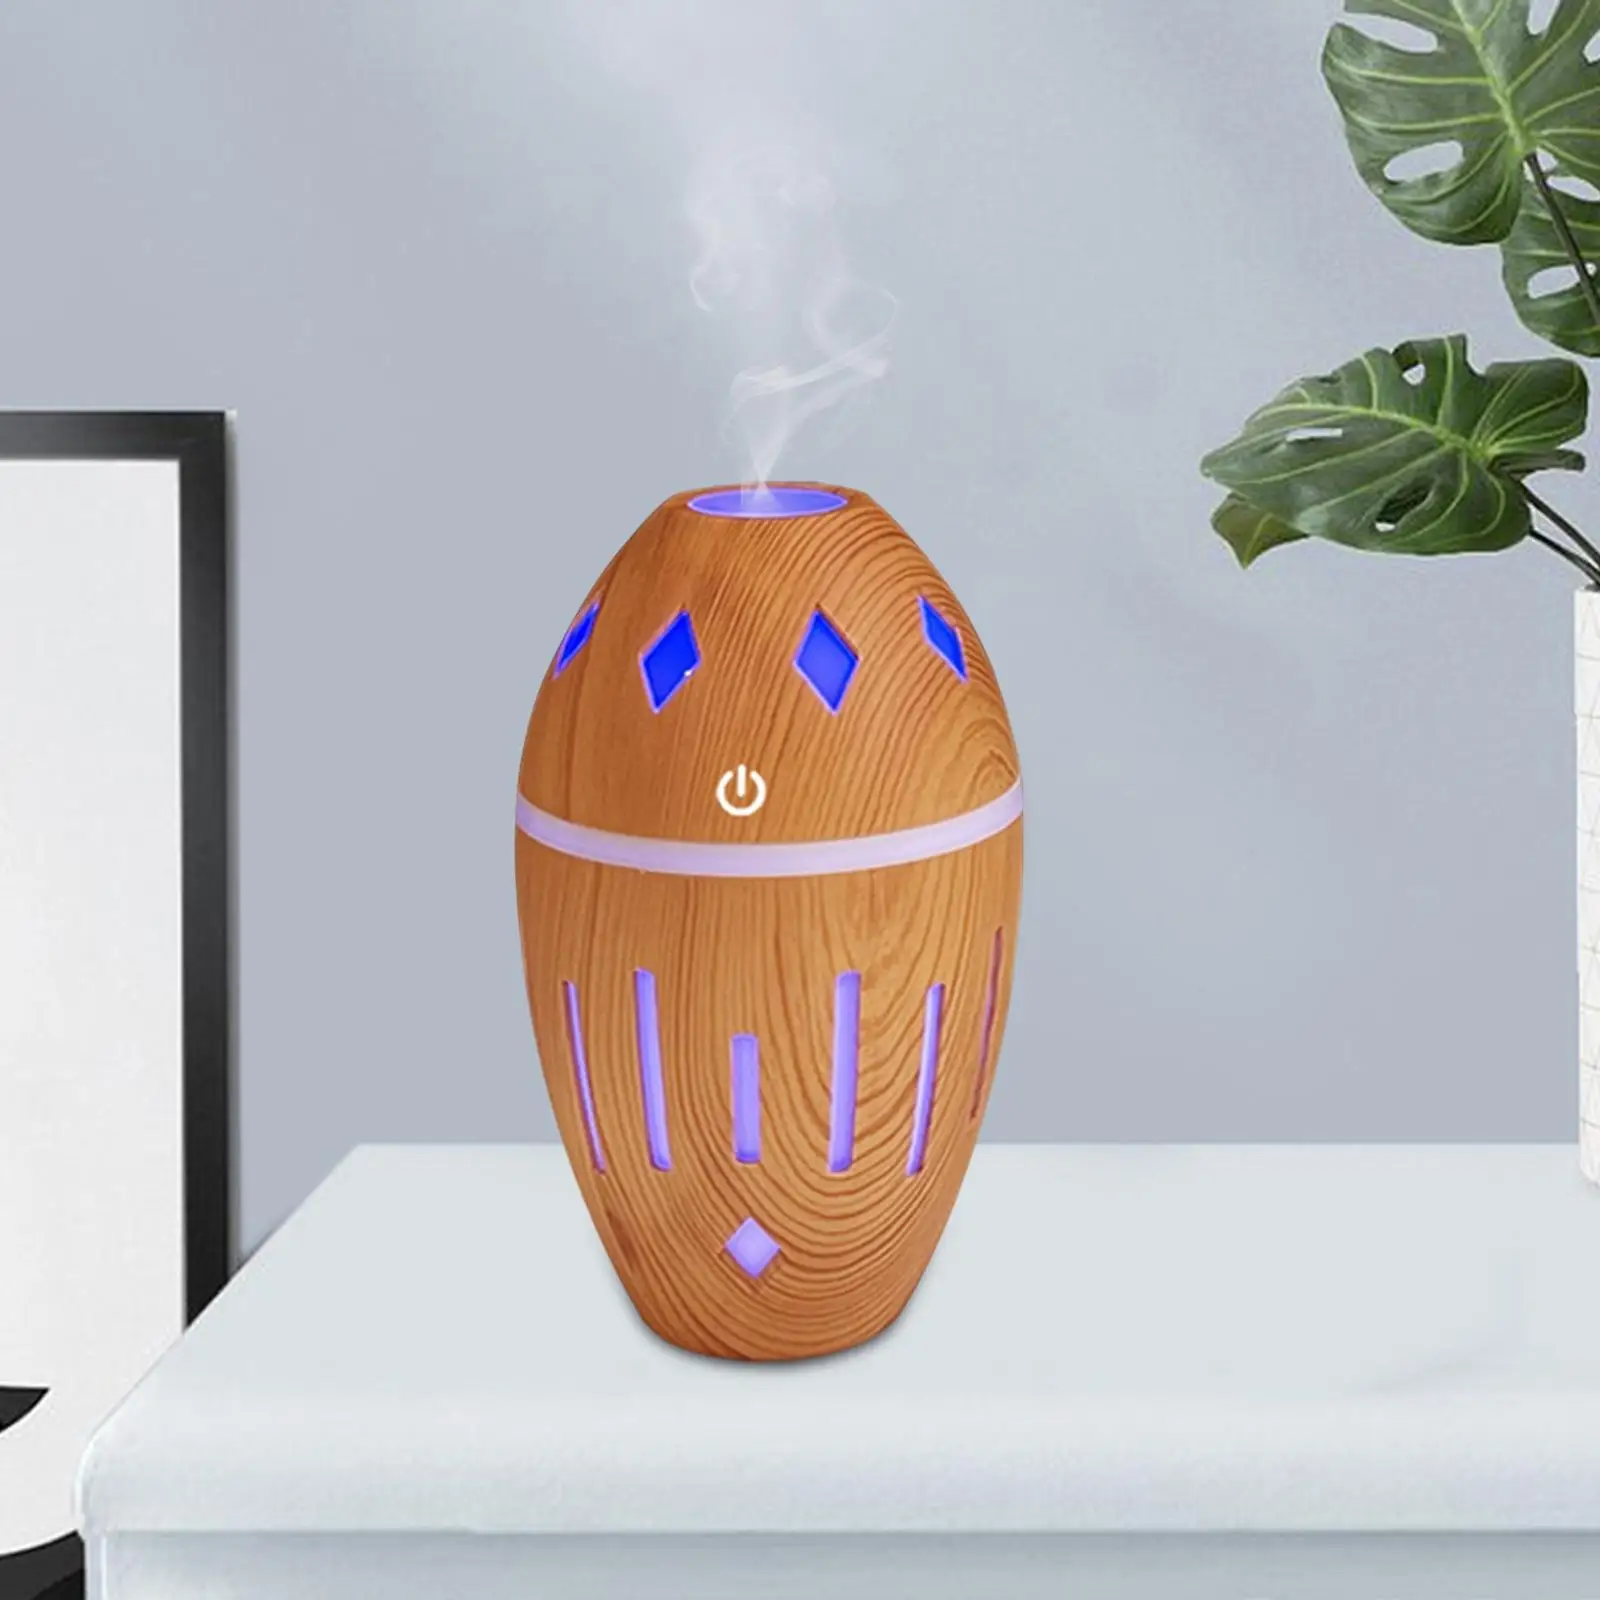 Cool Mist Humidifier, Silent Portable Wood Grain Air Humidifier for Tabletop Nursery Living Room